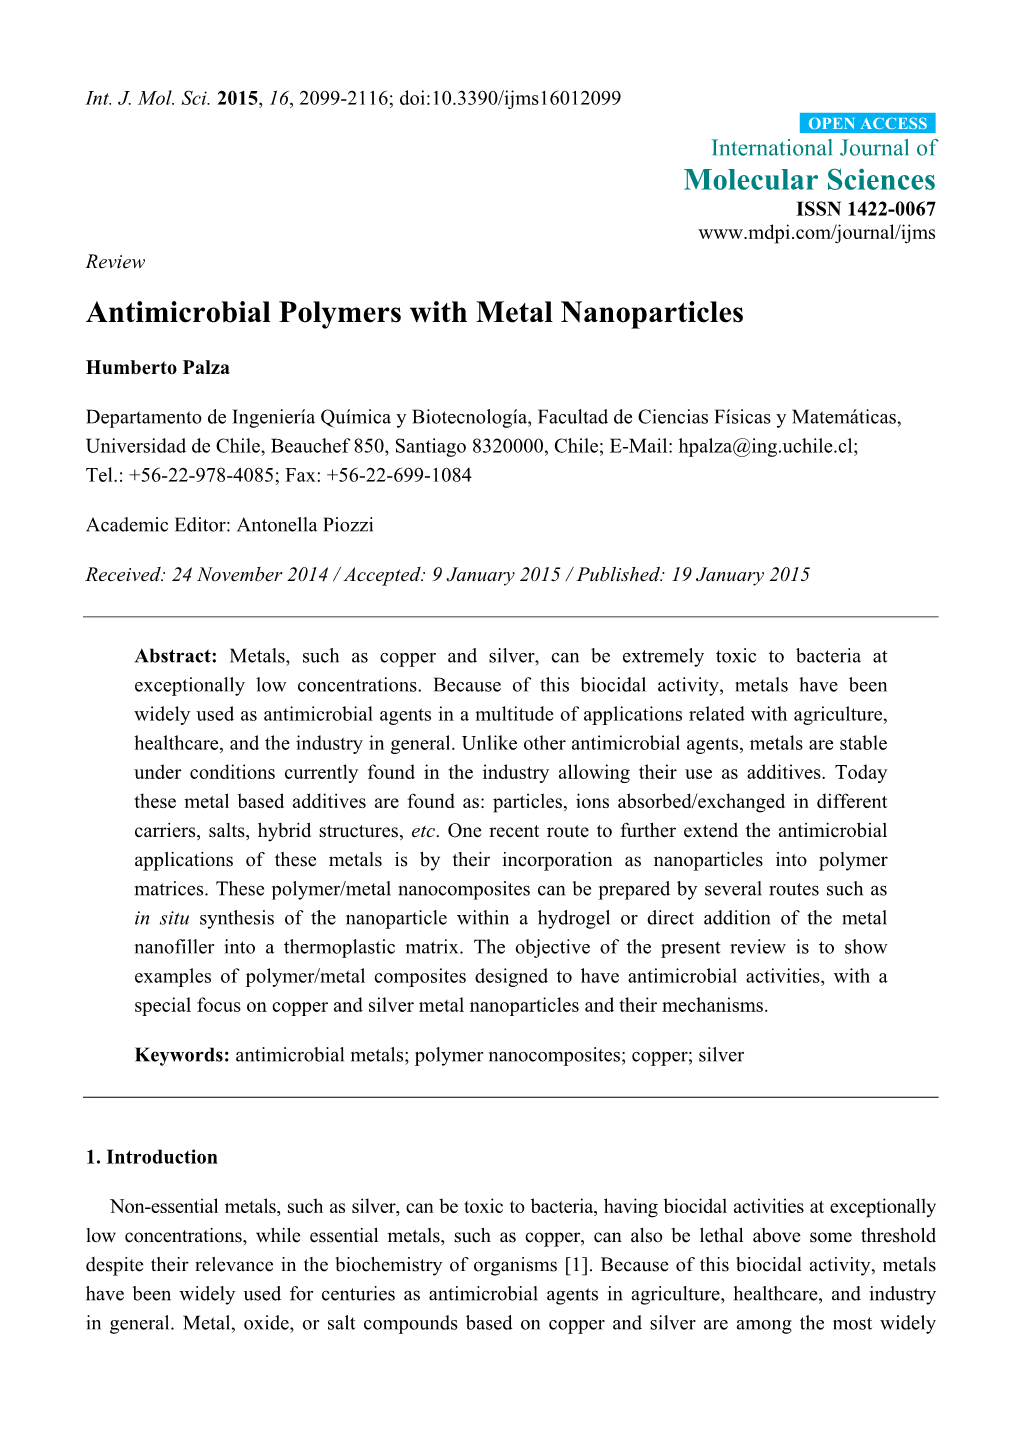 Antimicrobial Polymers with Metal Nanoparticles